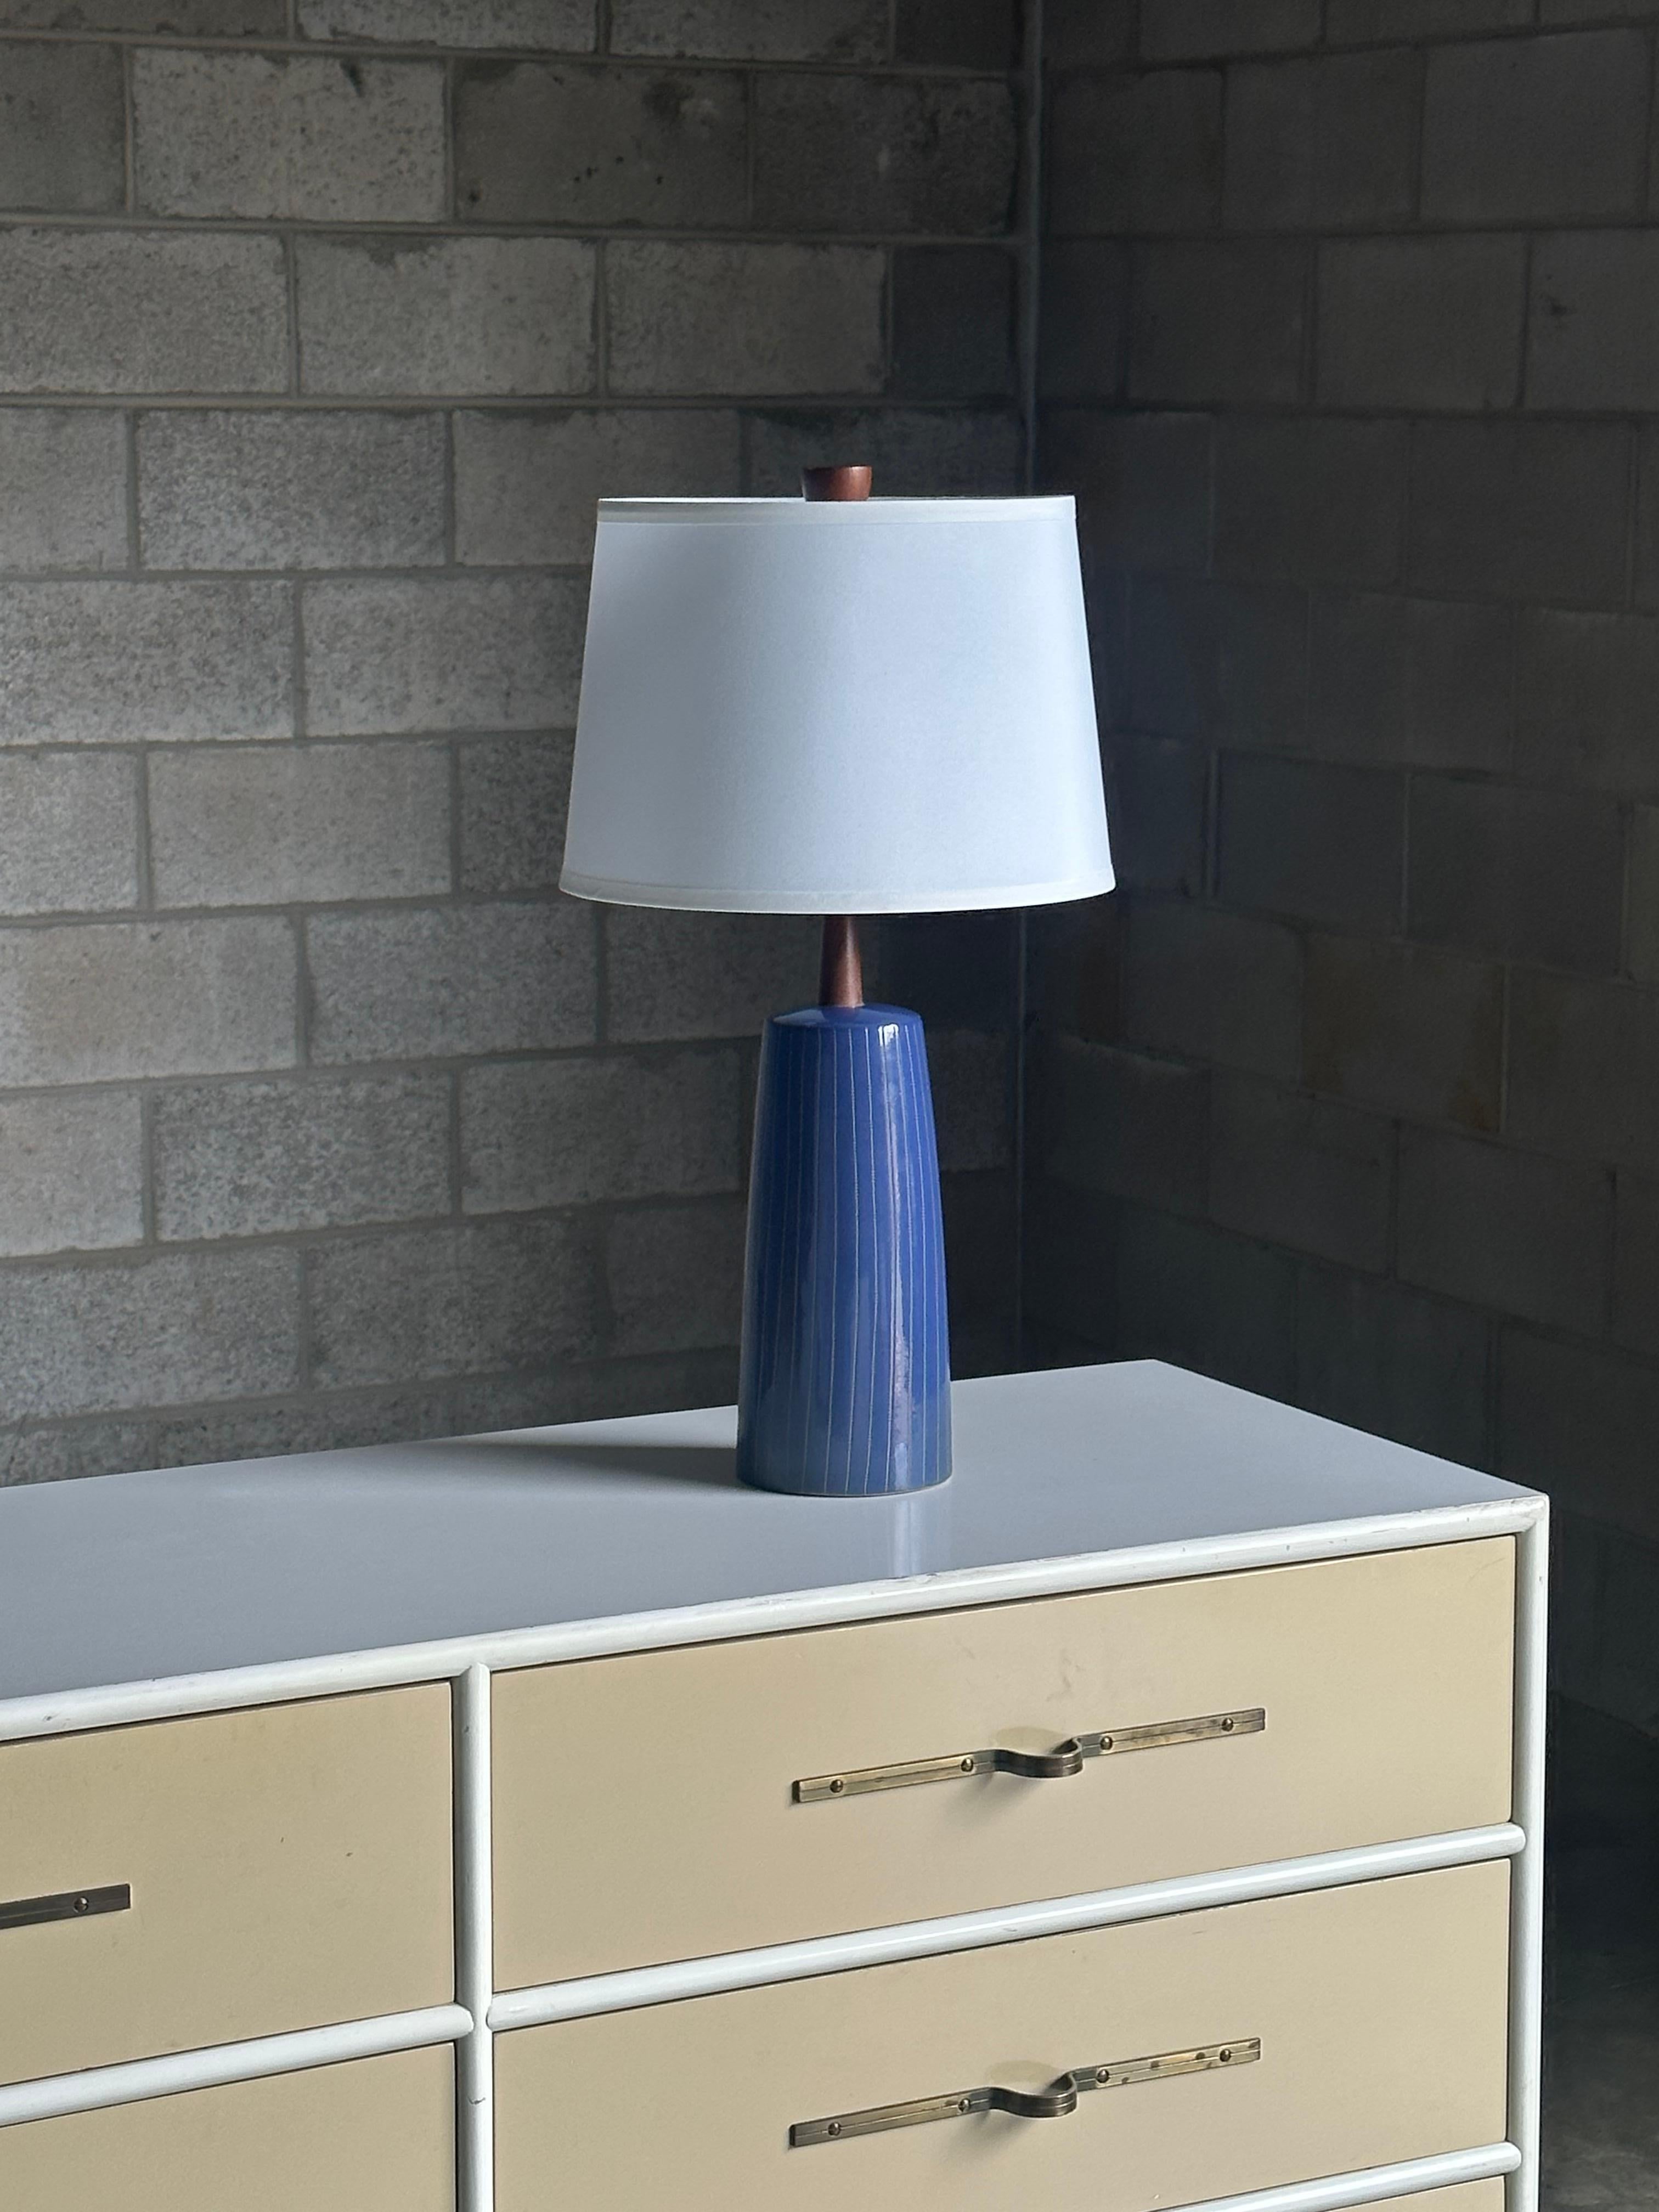 A wonderful table lamp designed by famed ceramicist duo Jane and Gordon Martz for Marshall Studios. Features a royal blue glaze with incised vertical stripes. Great walnut finial to complete the lamp.

Overall dimensions:
24” tall
13” wide

Ceramic